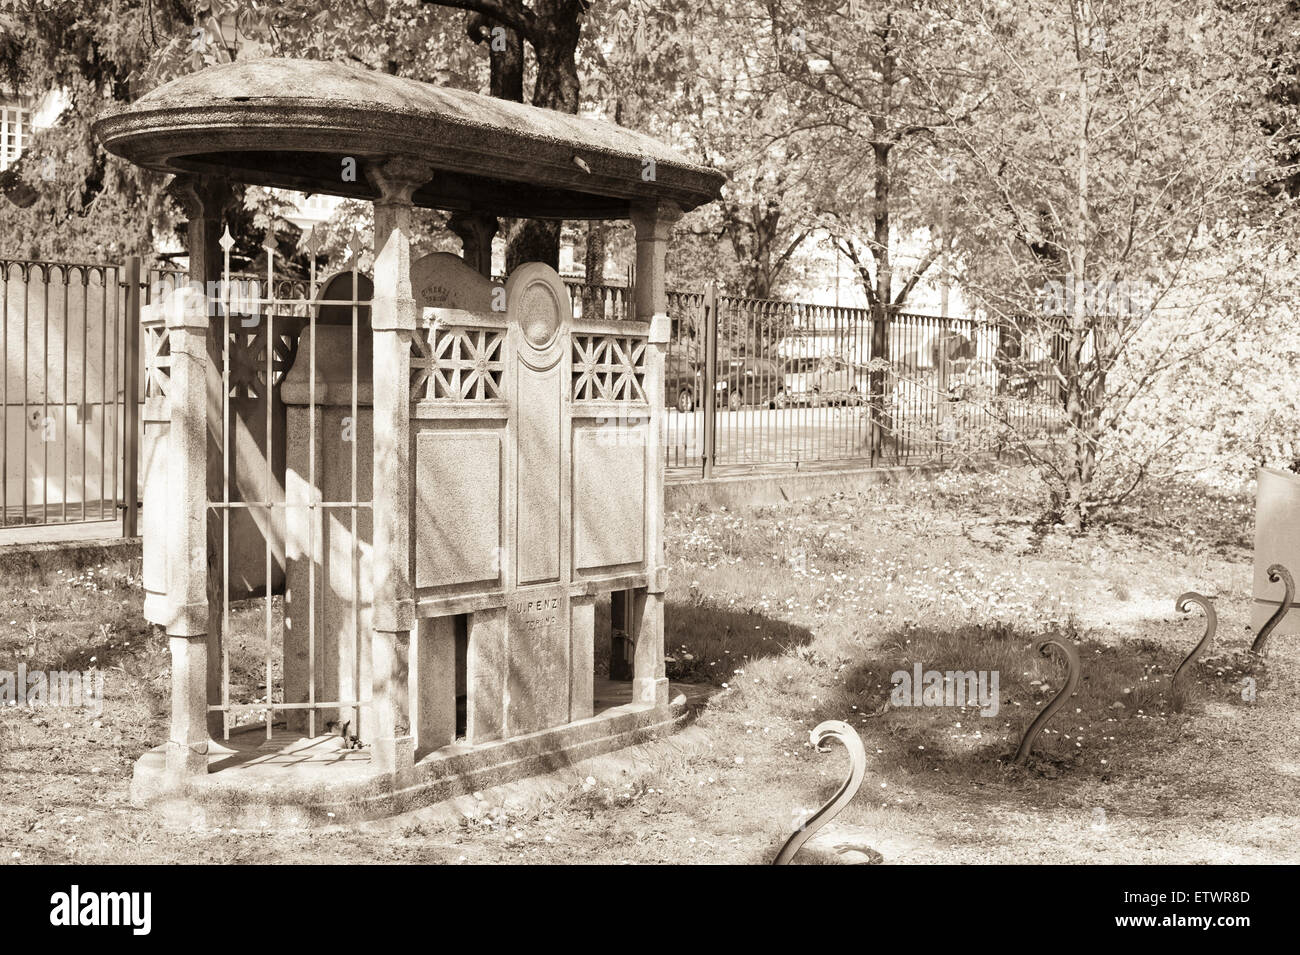 Public toilet (in a park) from the early 1900s Stock Photo